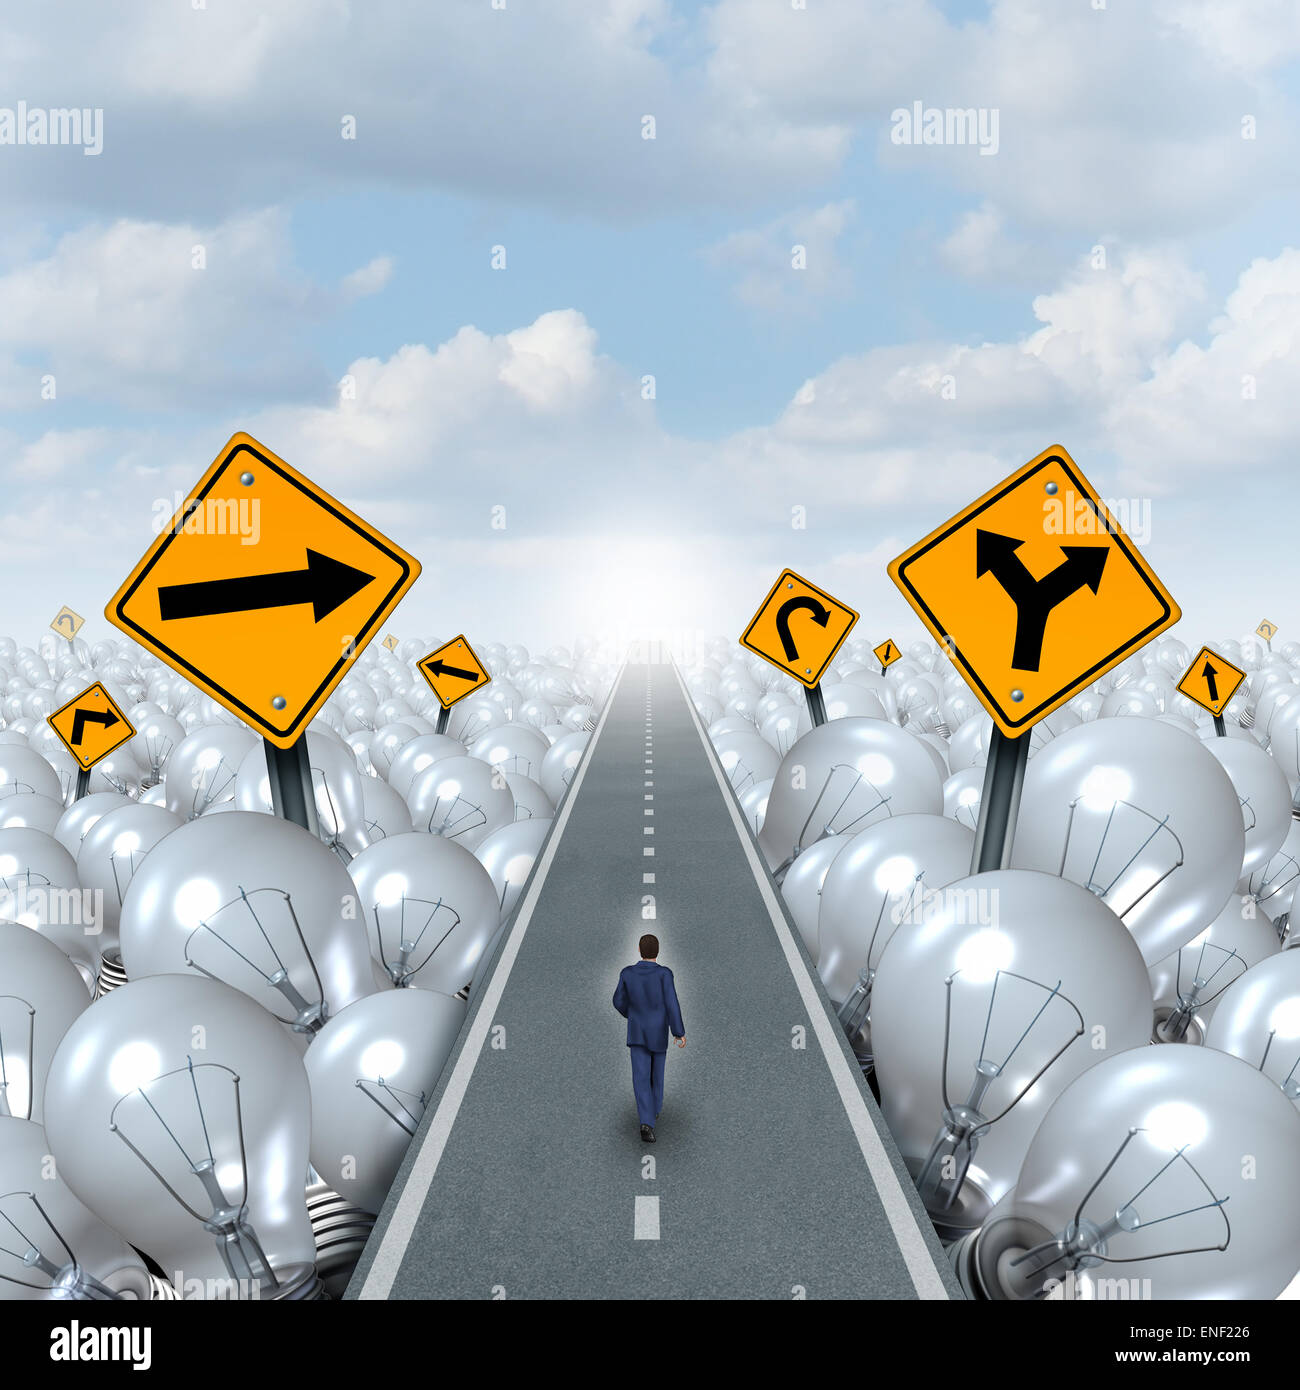 Lightbulb road and Idea path and creative pathway business concept as a businessman walking through a highway as a light bulb group with traffic signs as a symbol and metaphor for innovation success leadership. Stock Photo